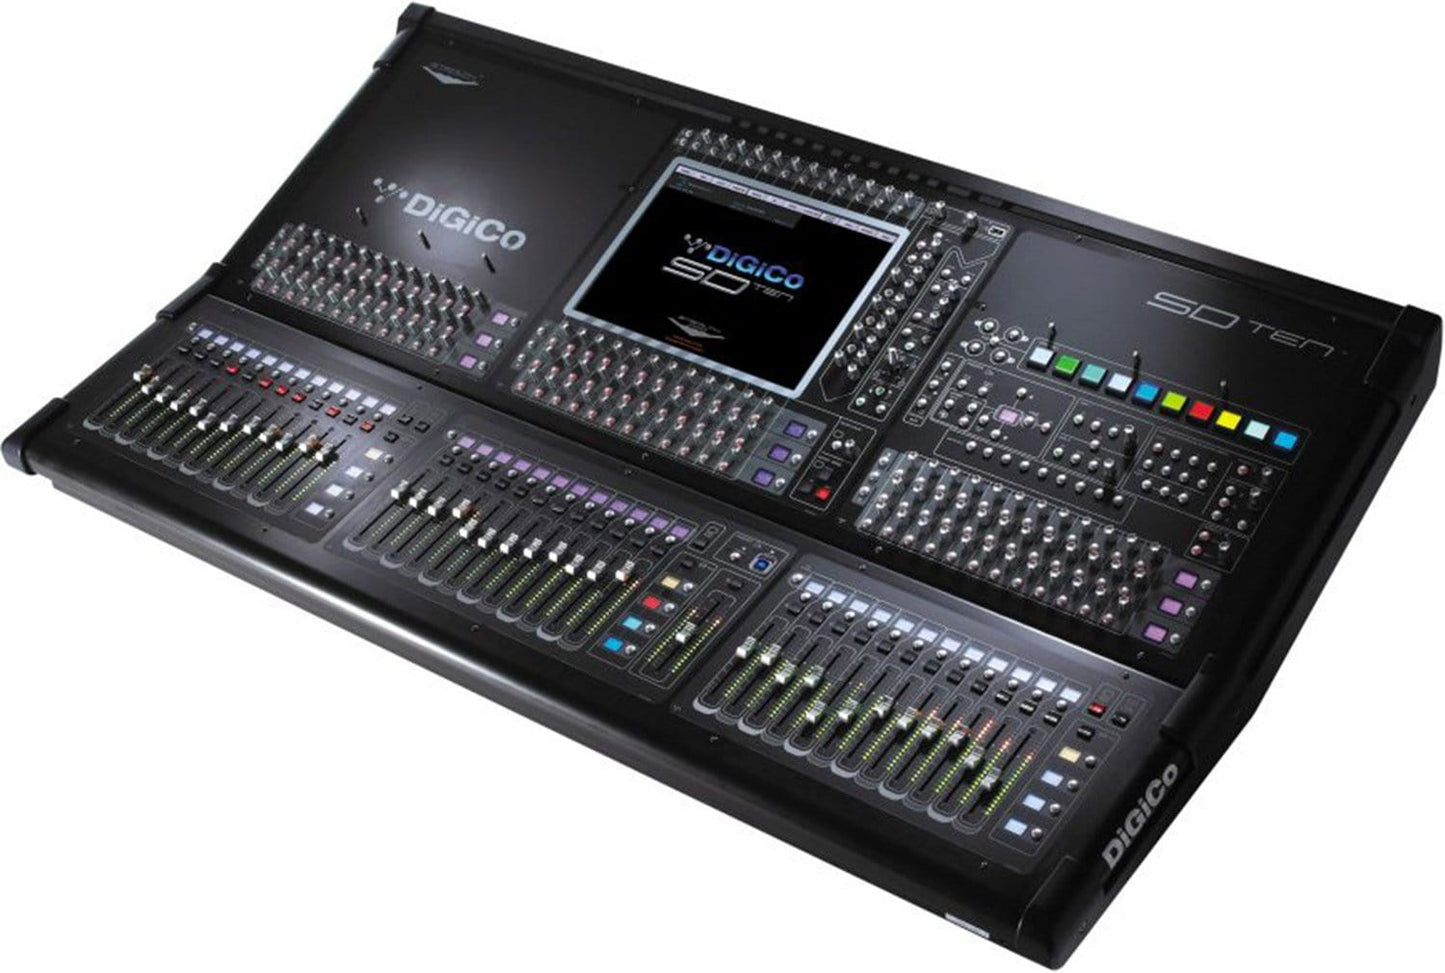 DiGiCo SD10 HMA Optical touring Digital Console - PSSL ProSound and Stage Lighting